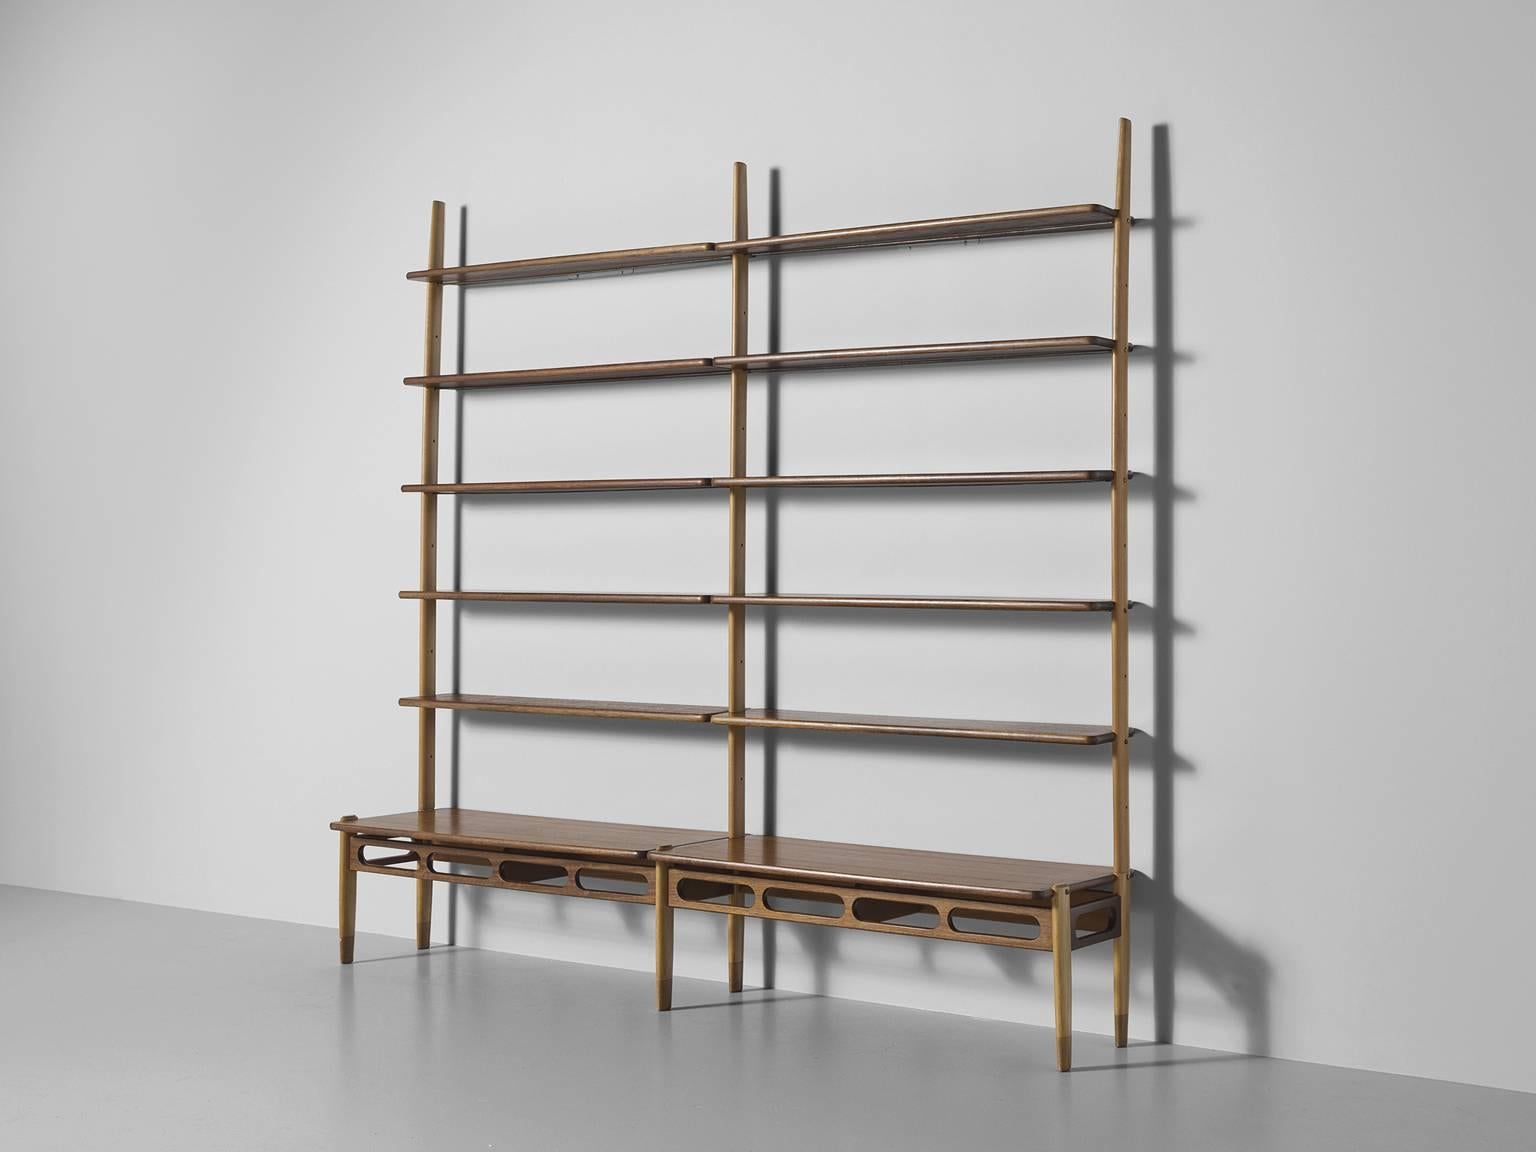 Shelving unit by William Watting, walnut, The Netherlands, 1950s

This slender, elegant wall unit features two sections that each consist of a wide base above which five further shelves are displayed. The units main feature is openness, not only